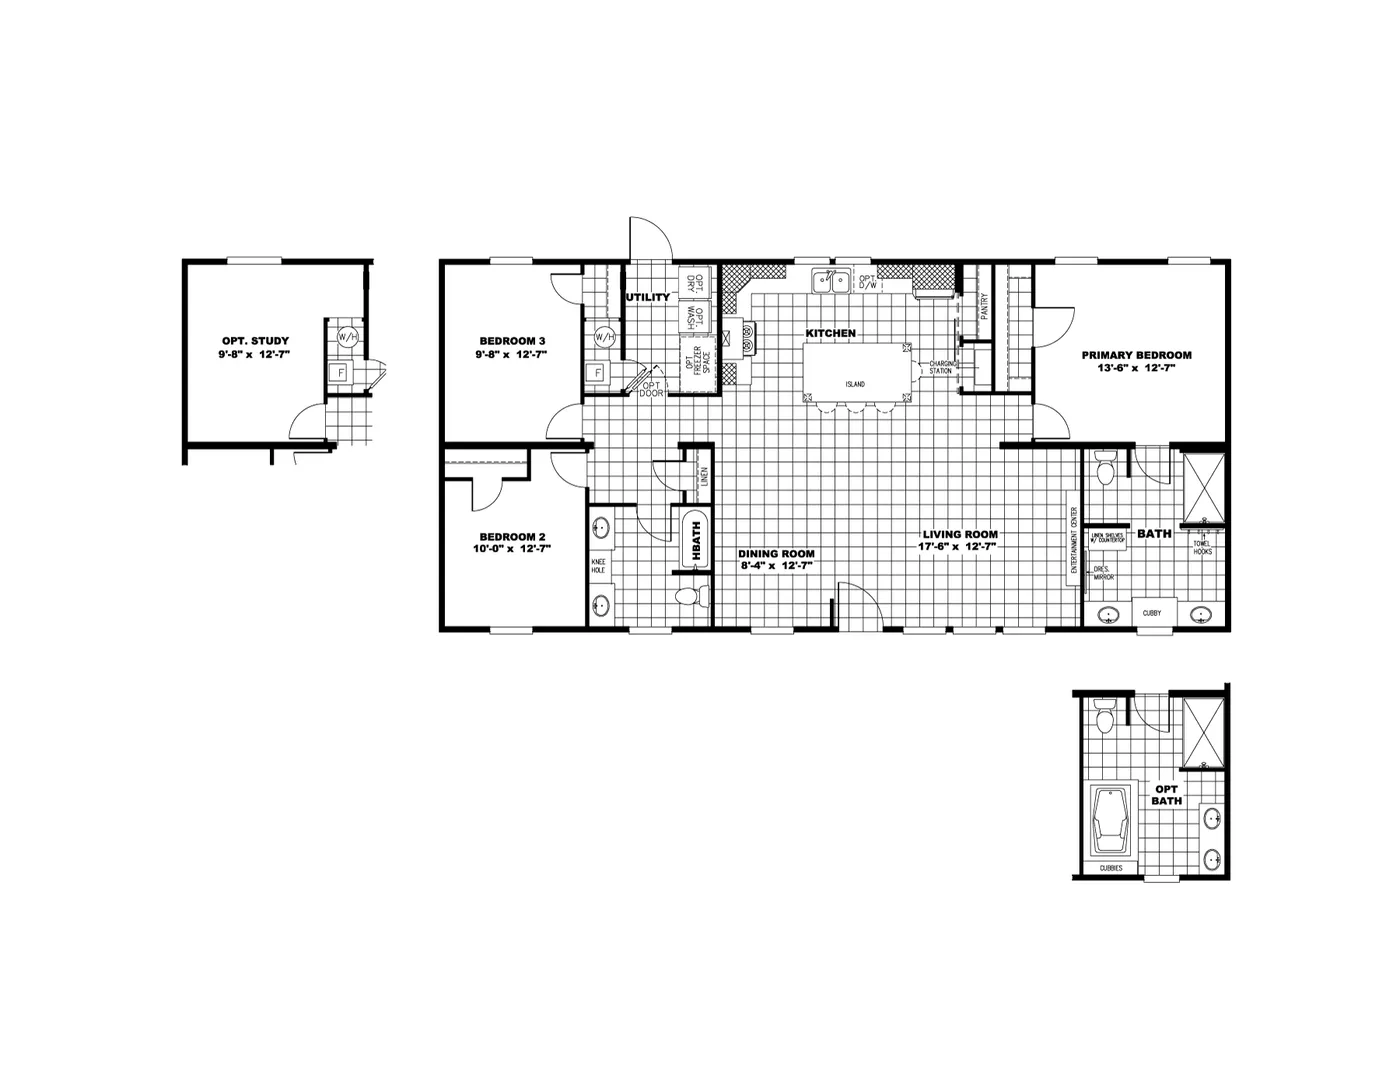 The ISLAND BREEZE 56' Floor Plan. This Manufactured Mobile Home features 3 bedrooms and 2 baths.